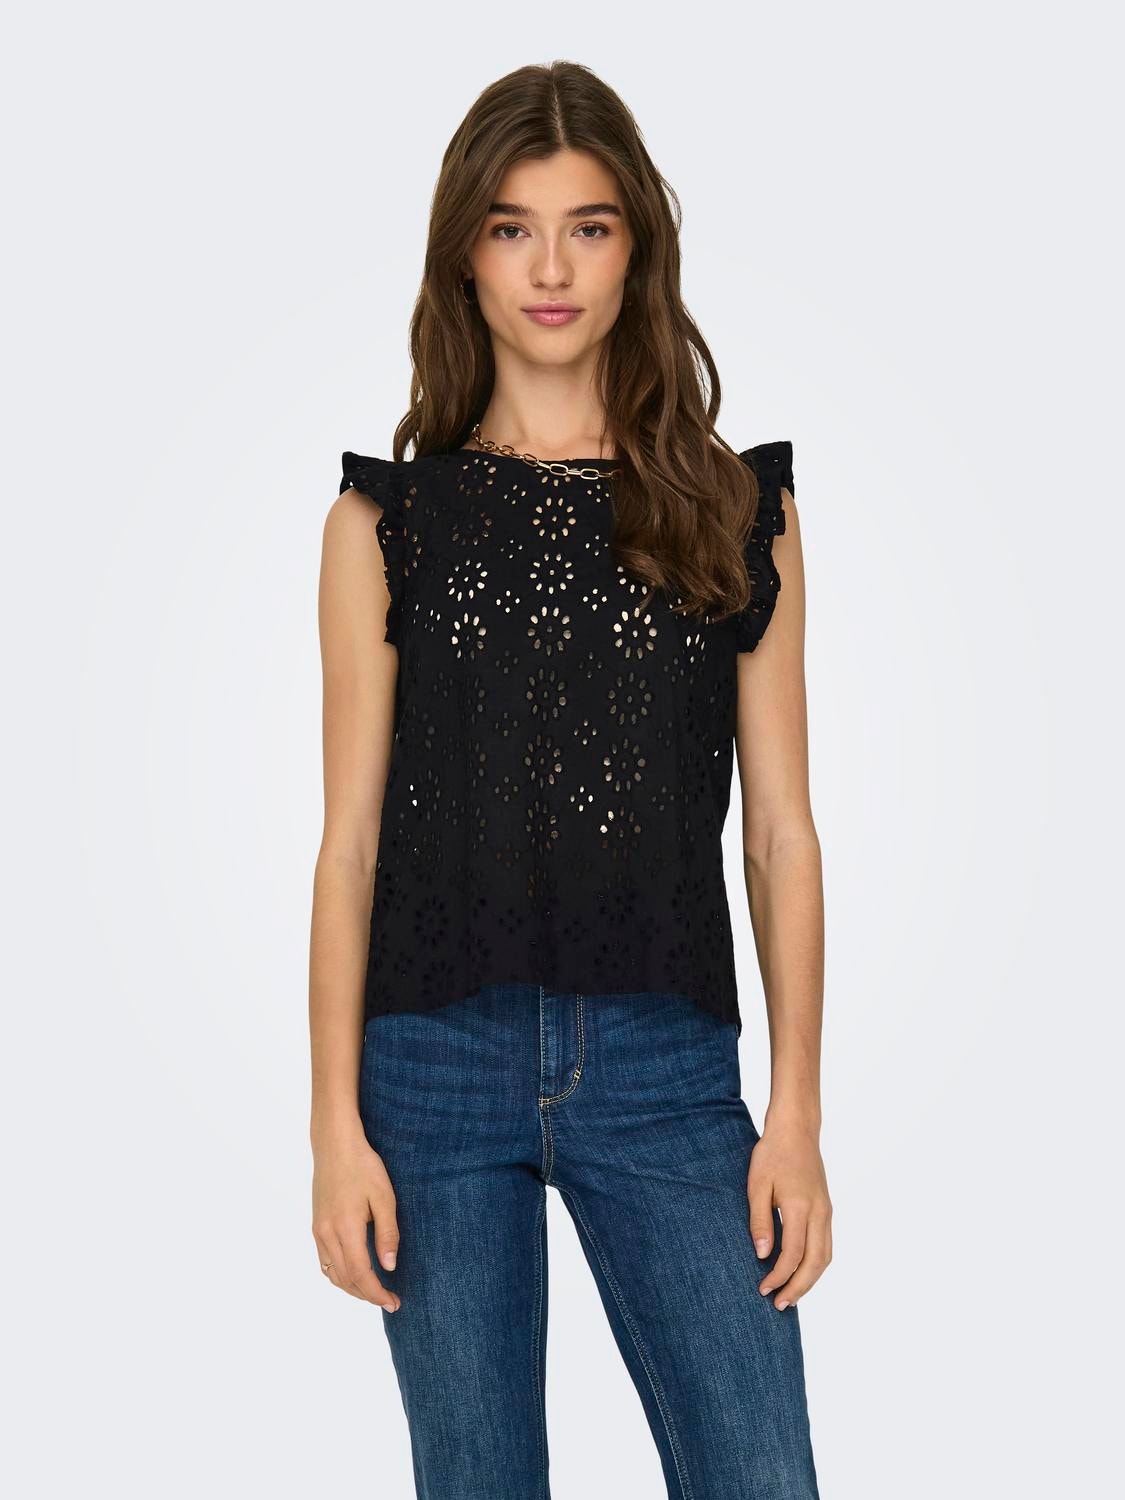 ONLY Embroidered top -Black - 15312383